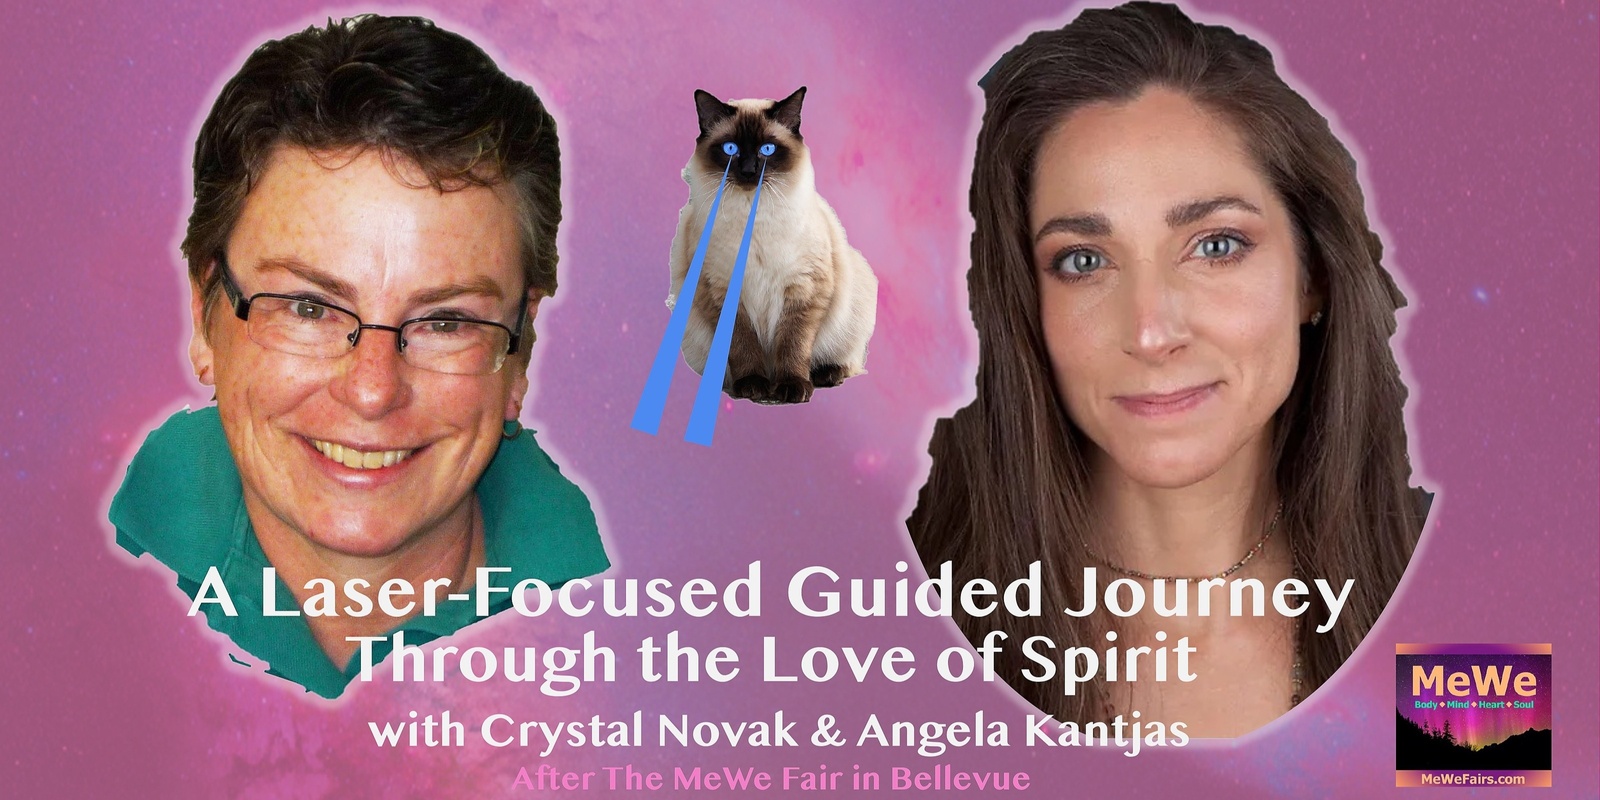 Banner image for A Laser-Focused Guided Journey Through the Love of Spirit After the MeWe Fair + Gem Show in Bellevue